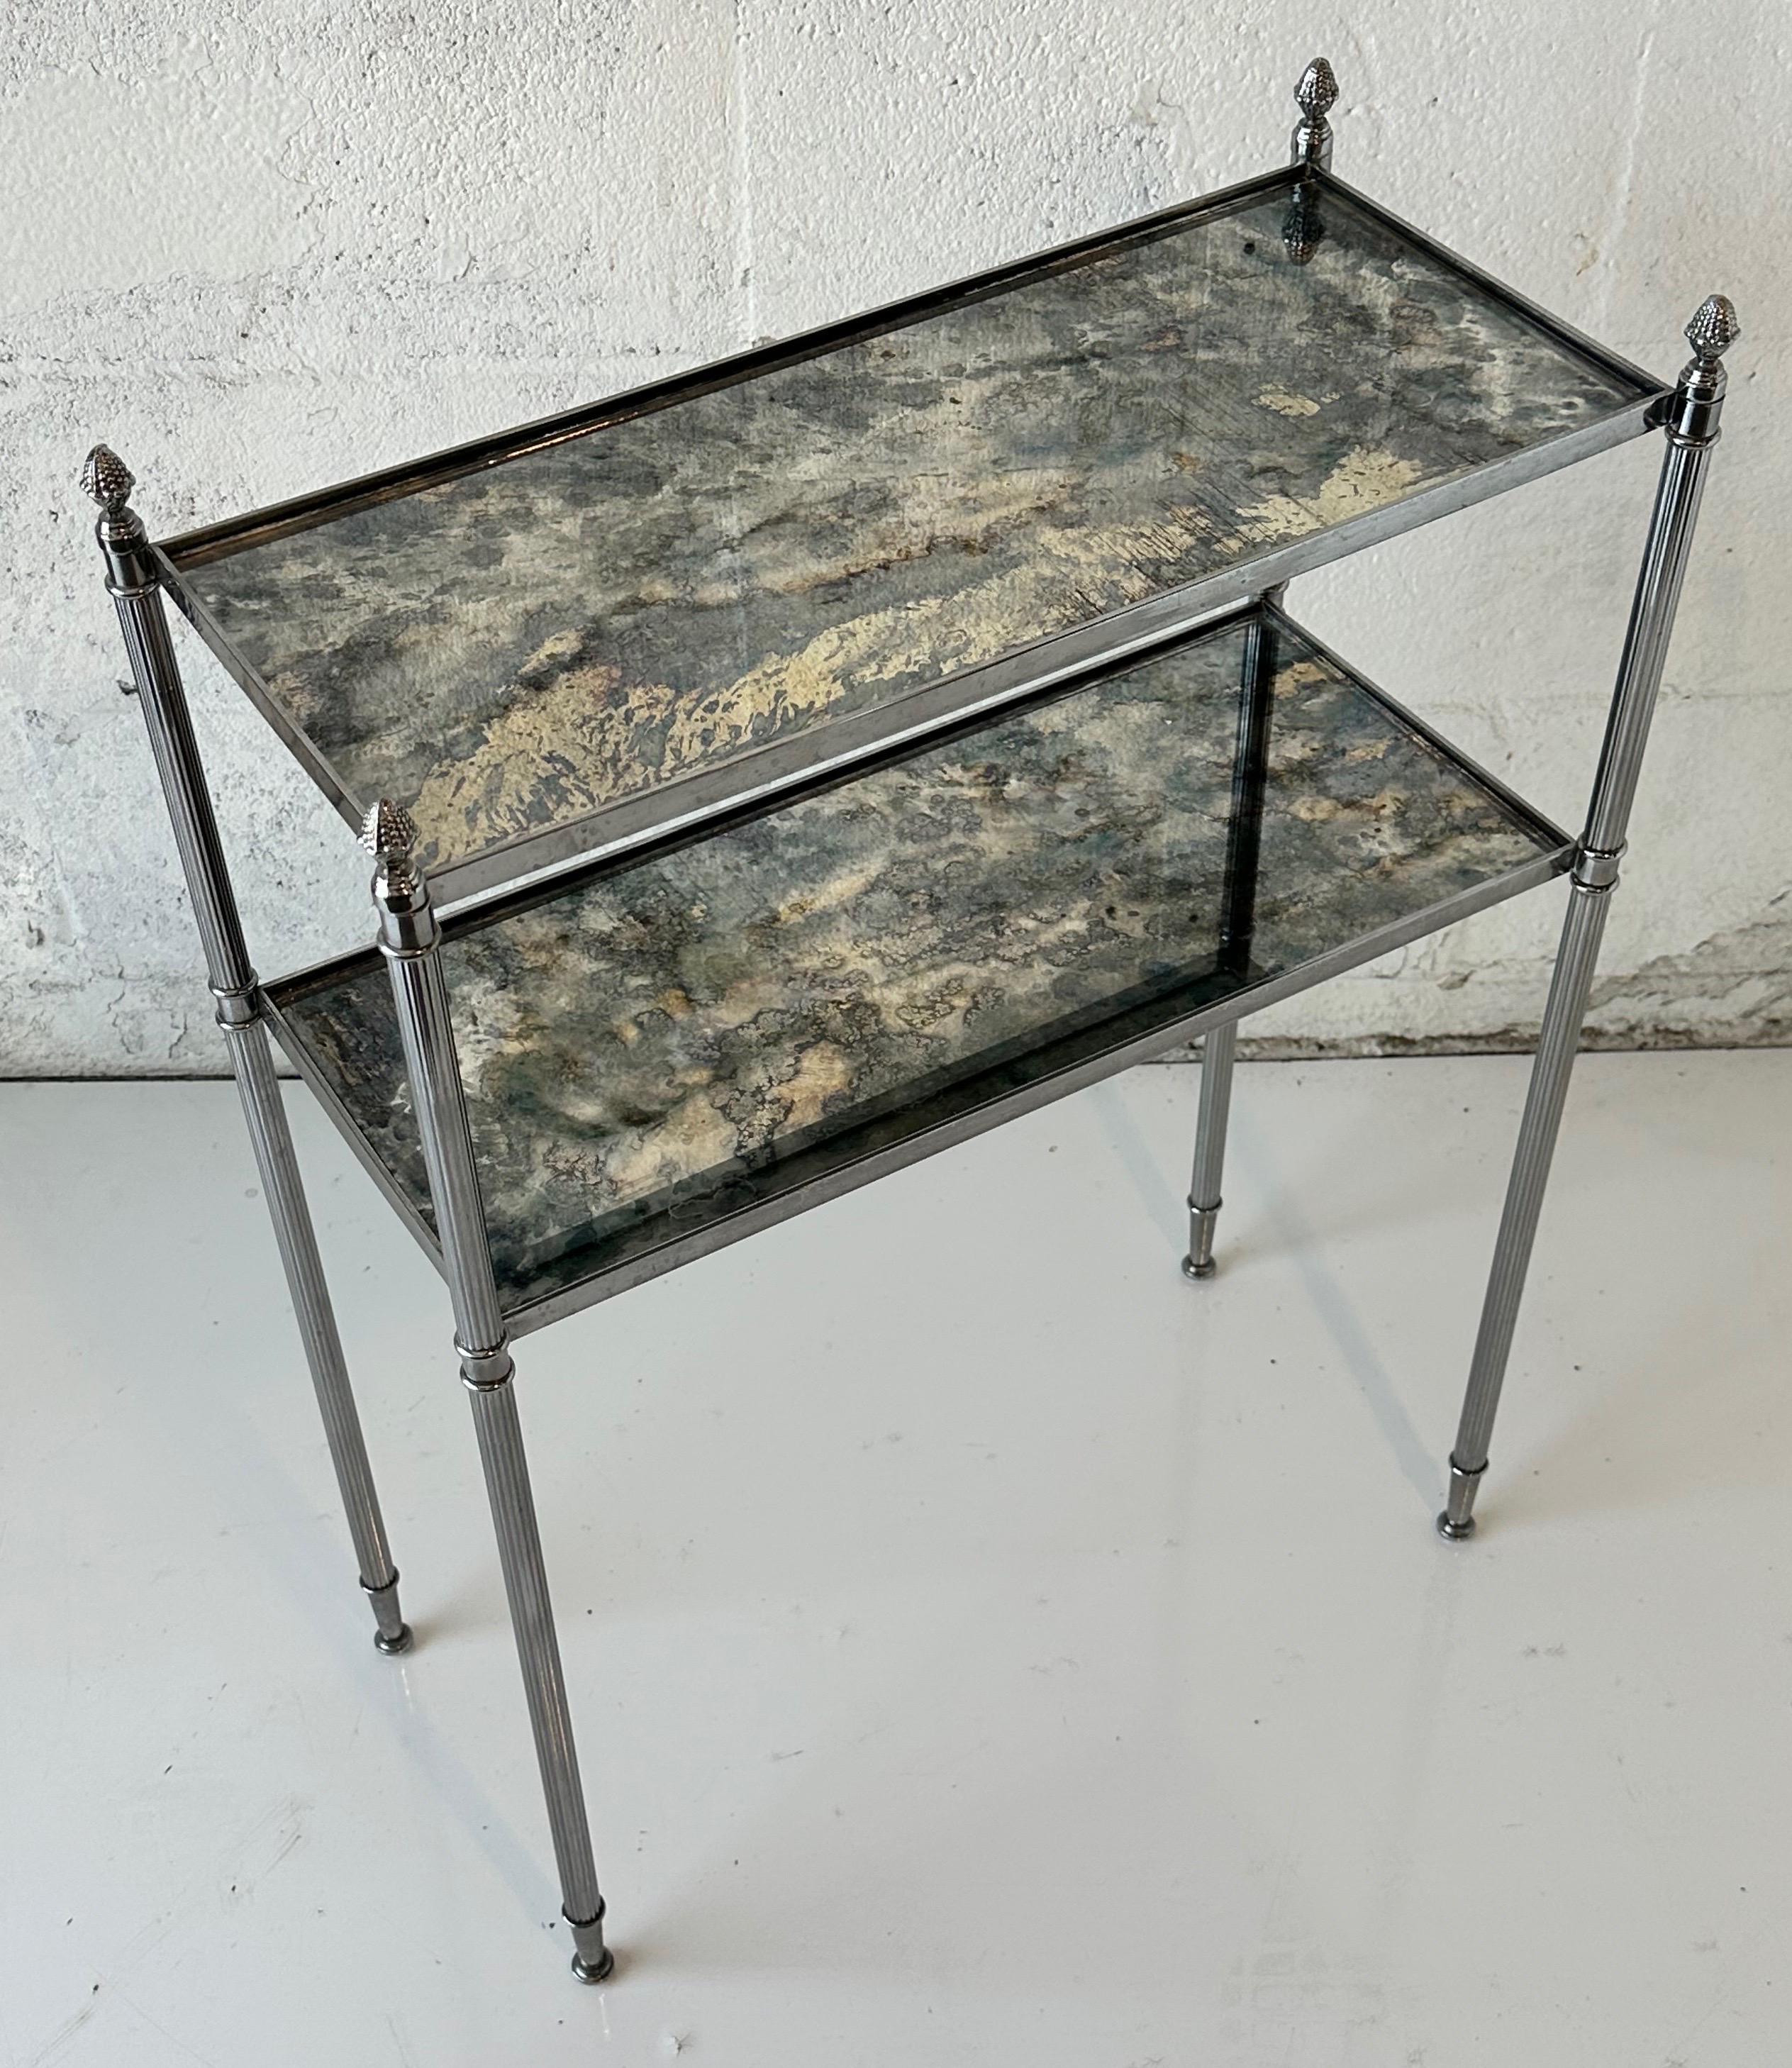 2 Tiers Side Table in the style of Maison Bagues in nickel plated brass and antique finish mirror.